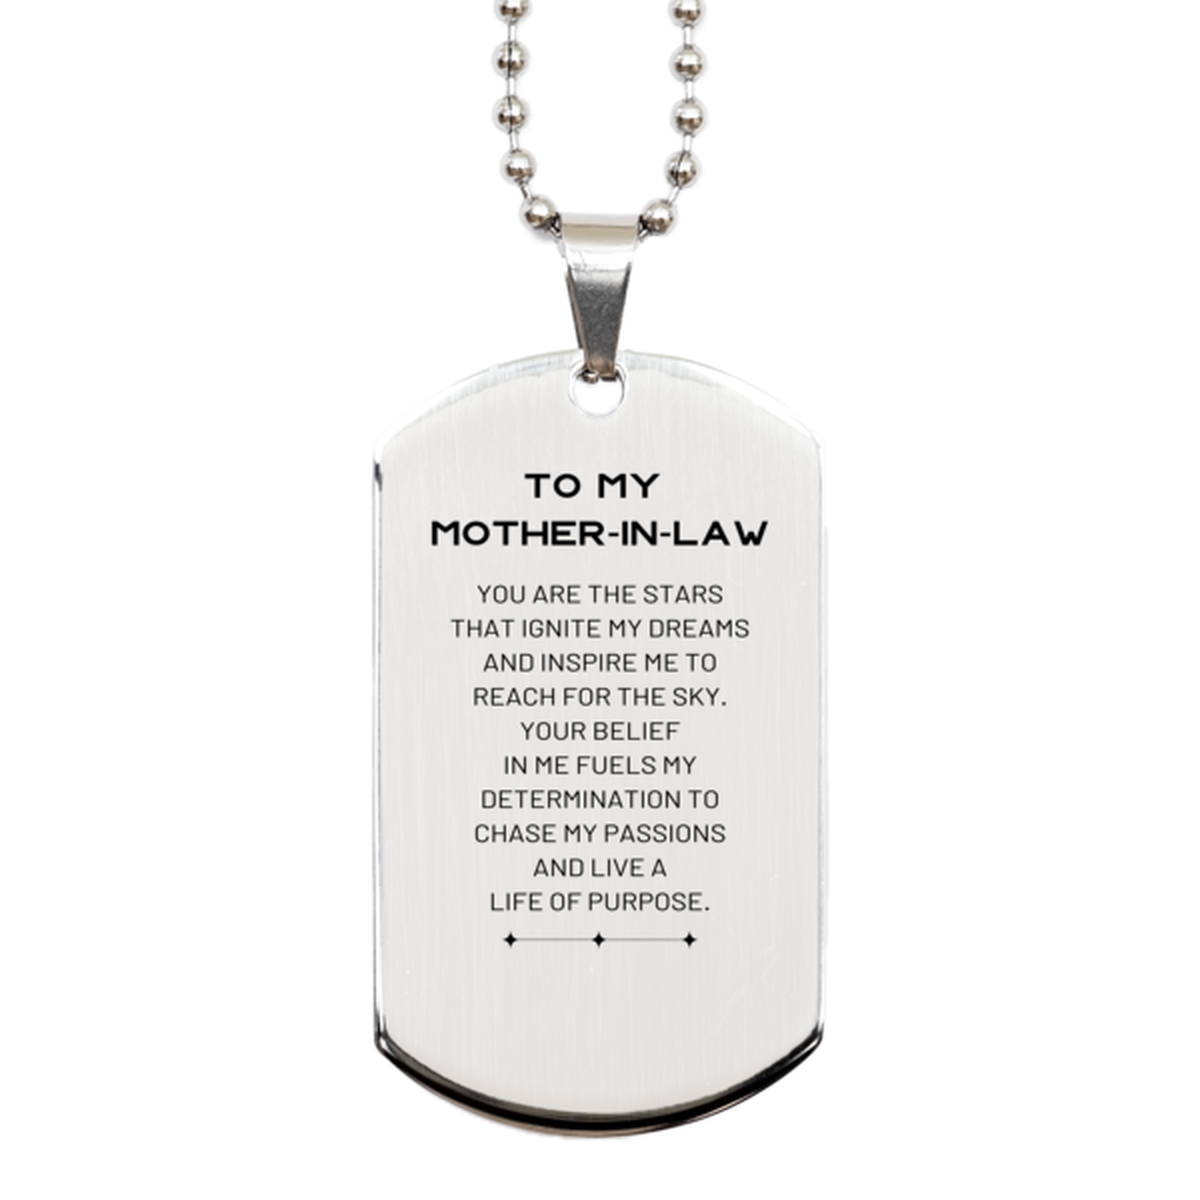 To My Mother-In-Law Silver Dog Tag, You are the stars that ignite my dreams and inspire me to reach for the sky, Birthday Unique Gifts For Mother-In-Law, Thank You Gifts For Mother-In-Law